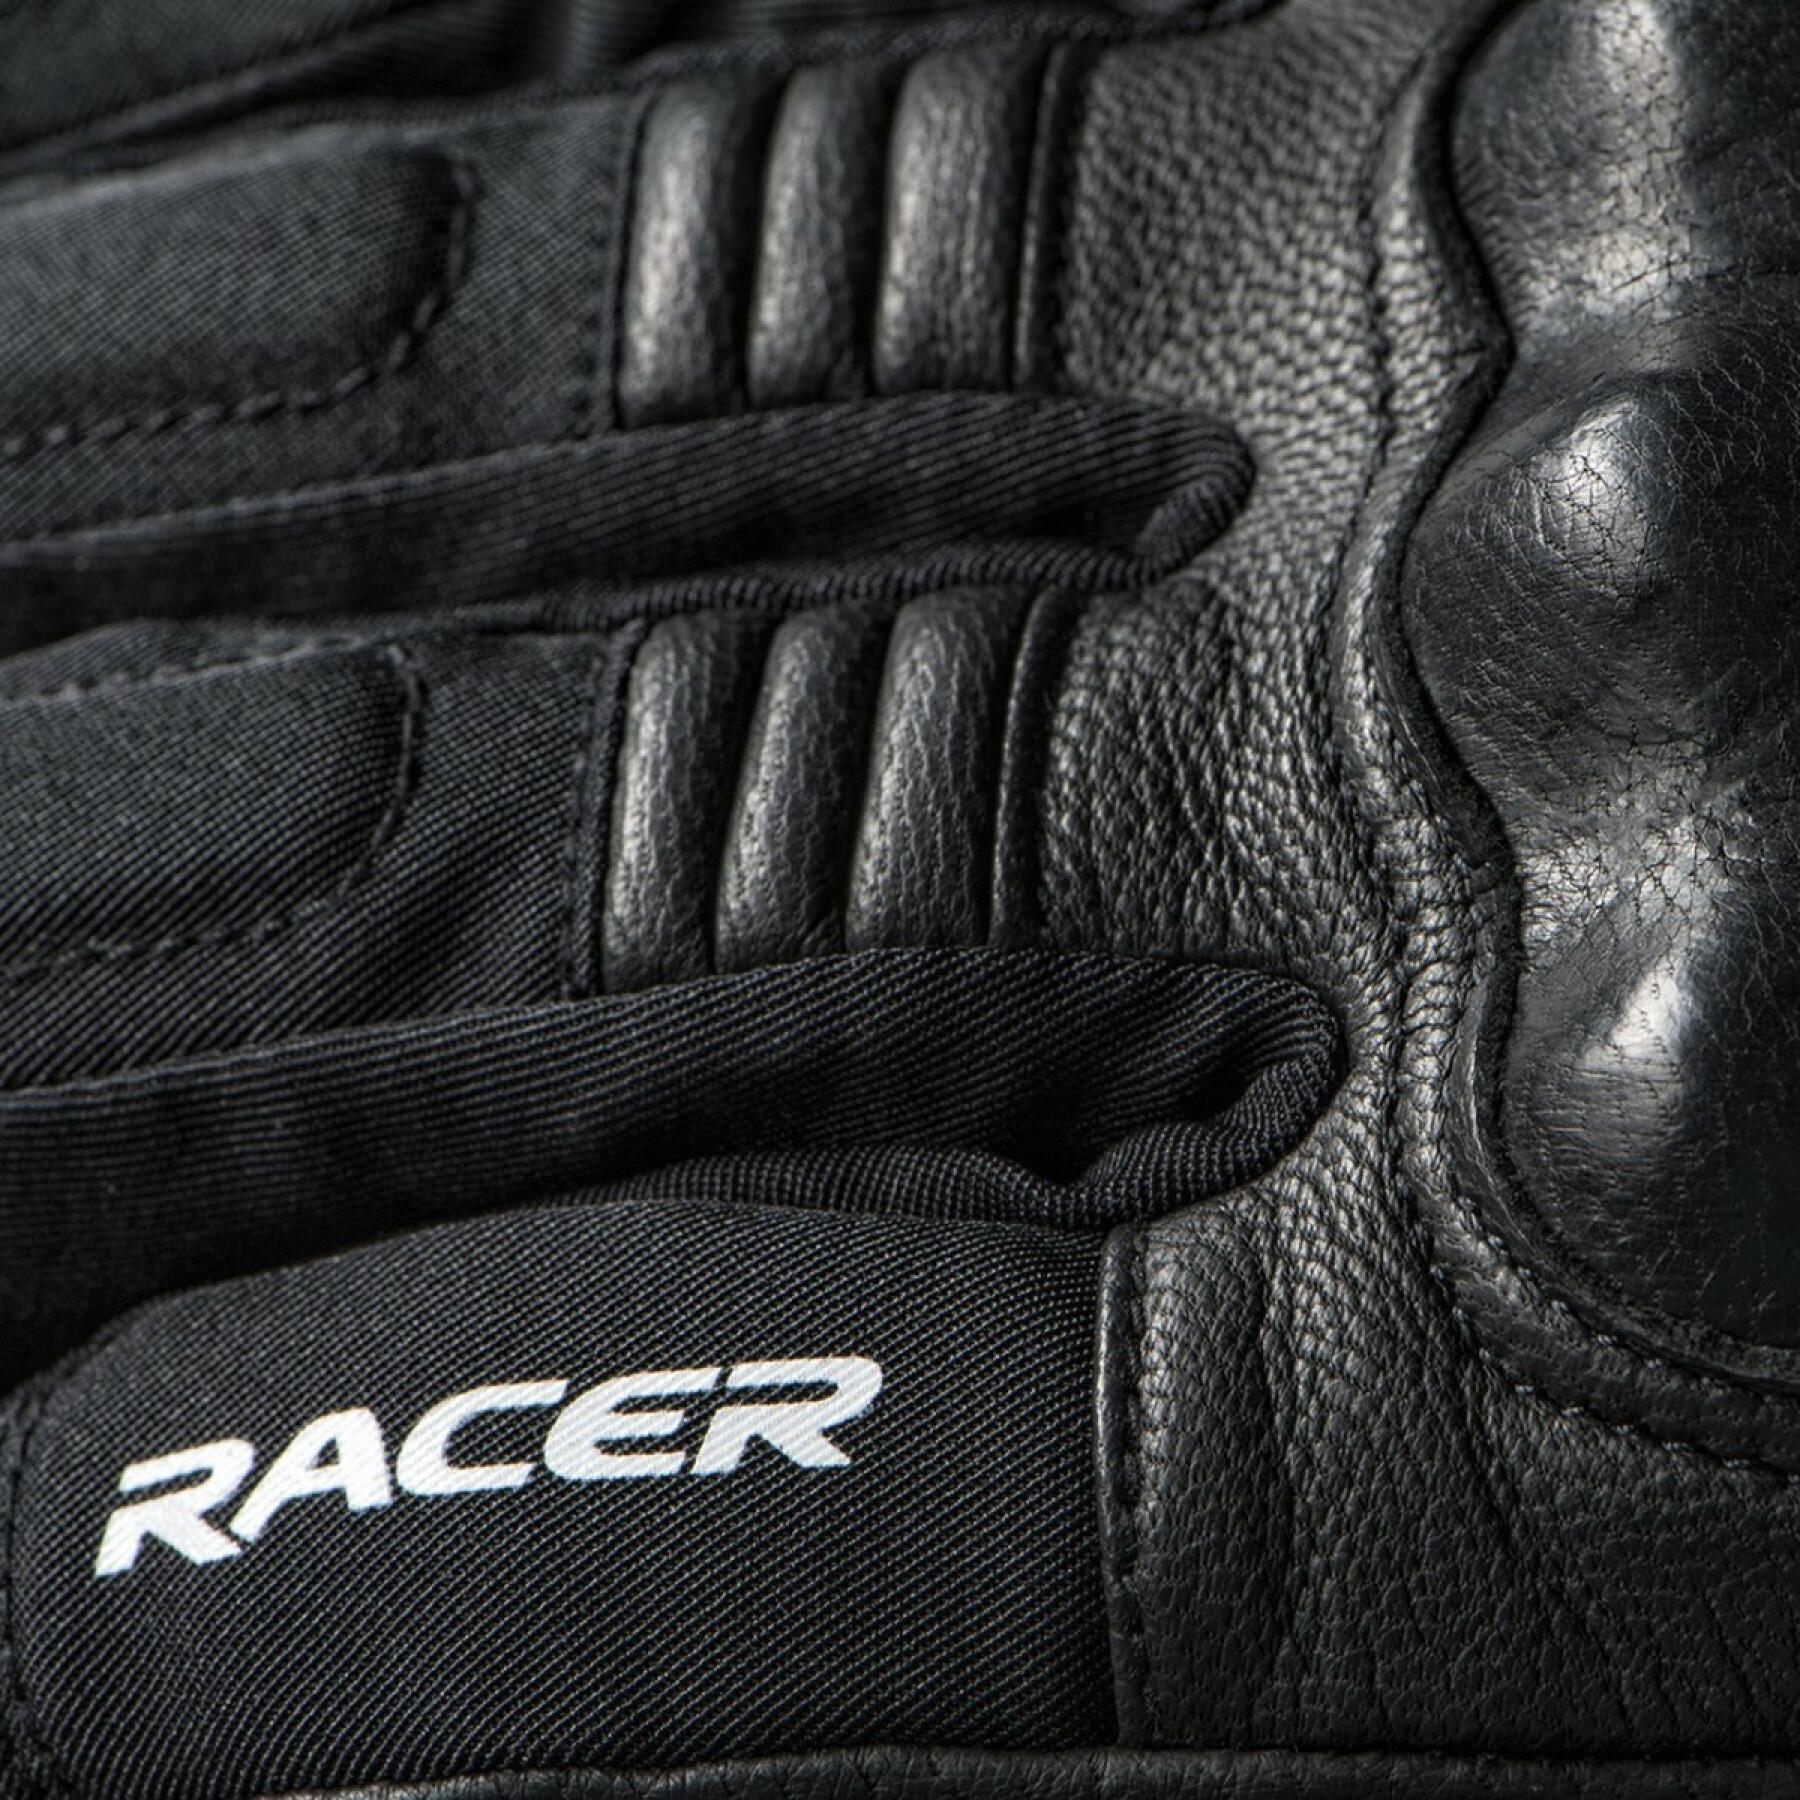 Winter motorcycle gloves Racer Dynamic 4 GTX